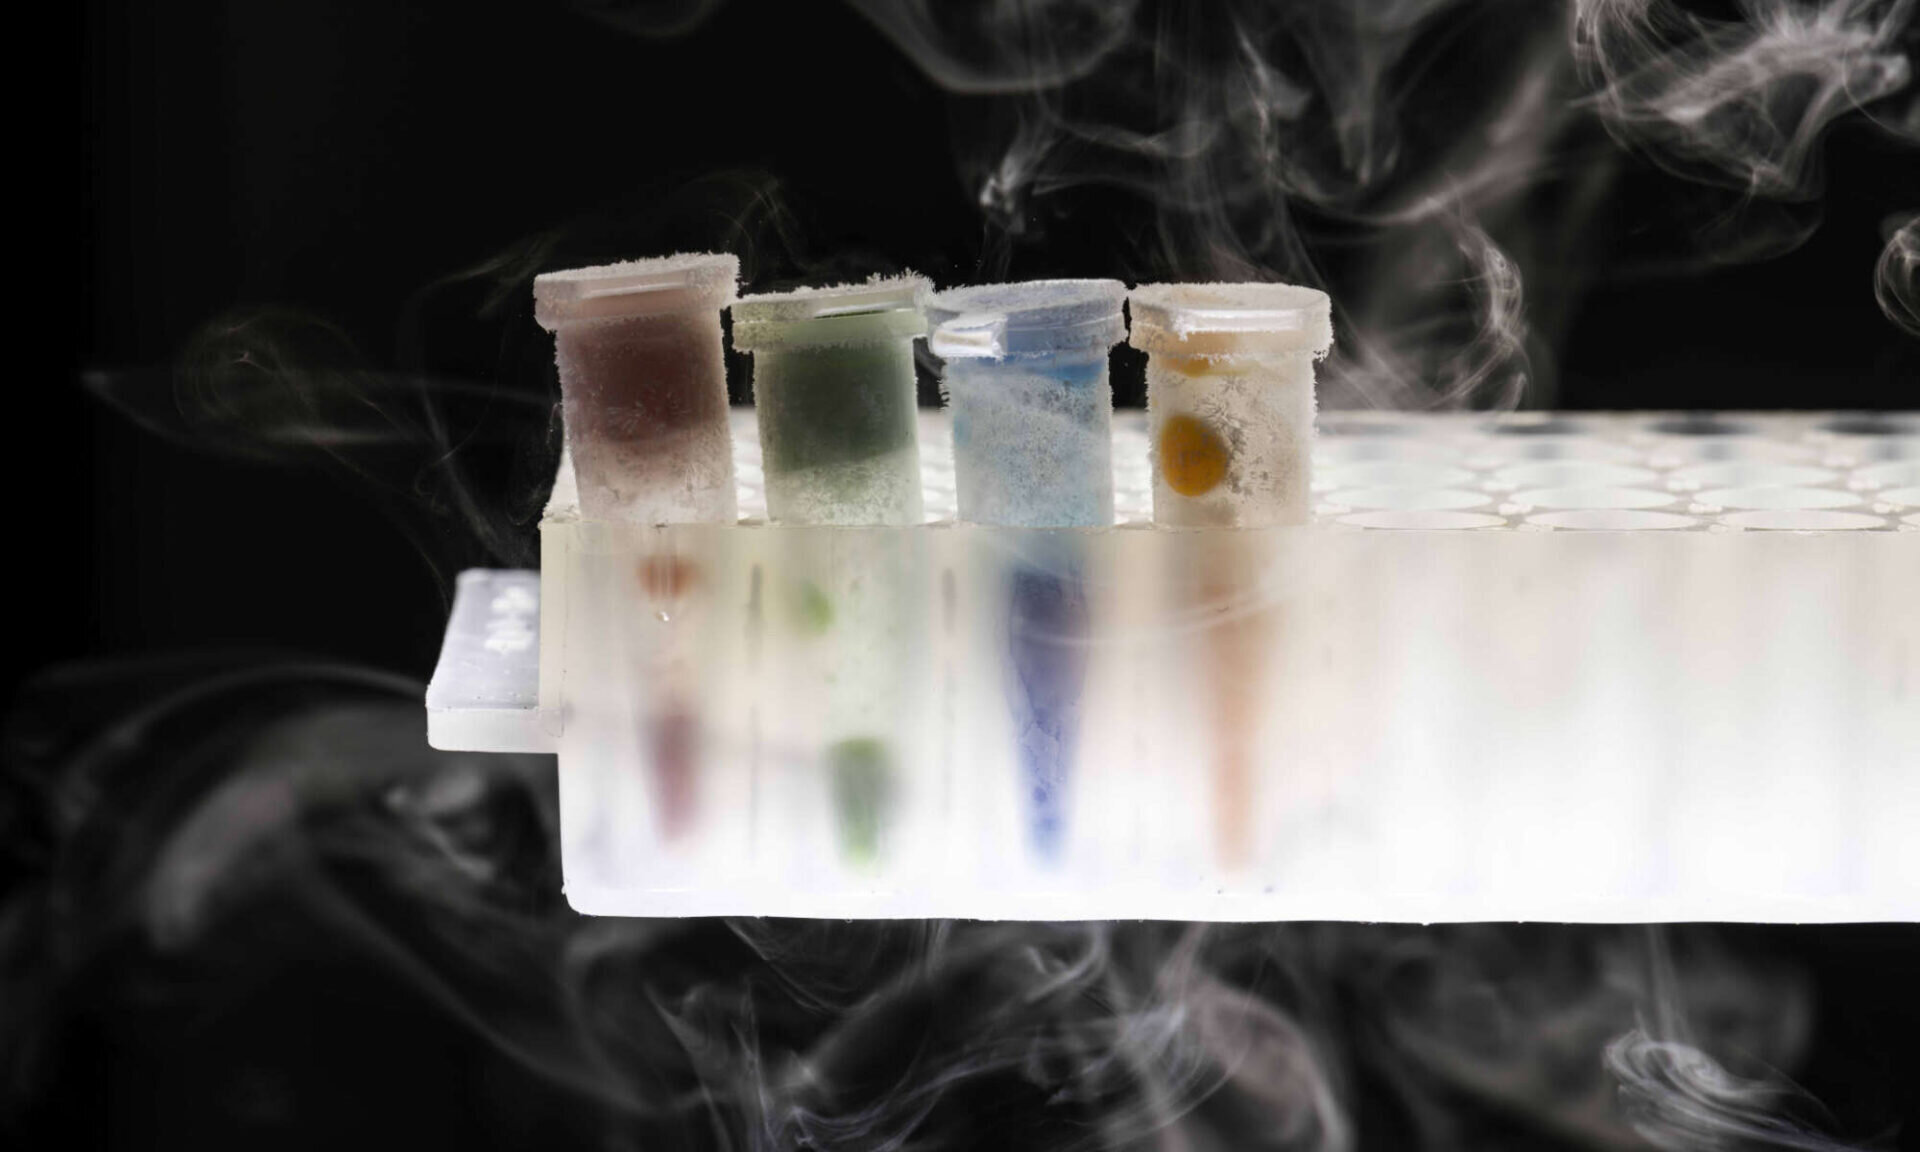 CULTURE CLUB: Members of the University of Rochester’s iGEM team used bacteria cultures, pictured here frozen in liquid nitrogen, to make 3D-bioprinted bacteria samples as part of their project to replicate chemicals found in plants. (University of Rochester photo / J. Adam Fenster)